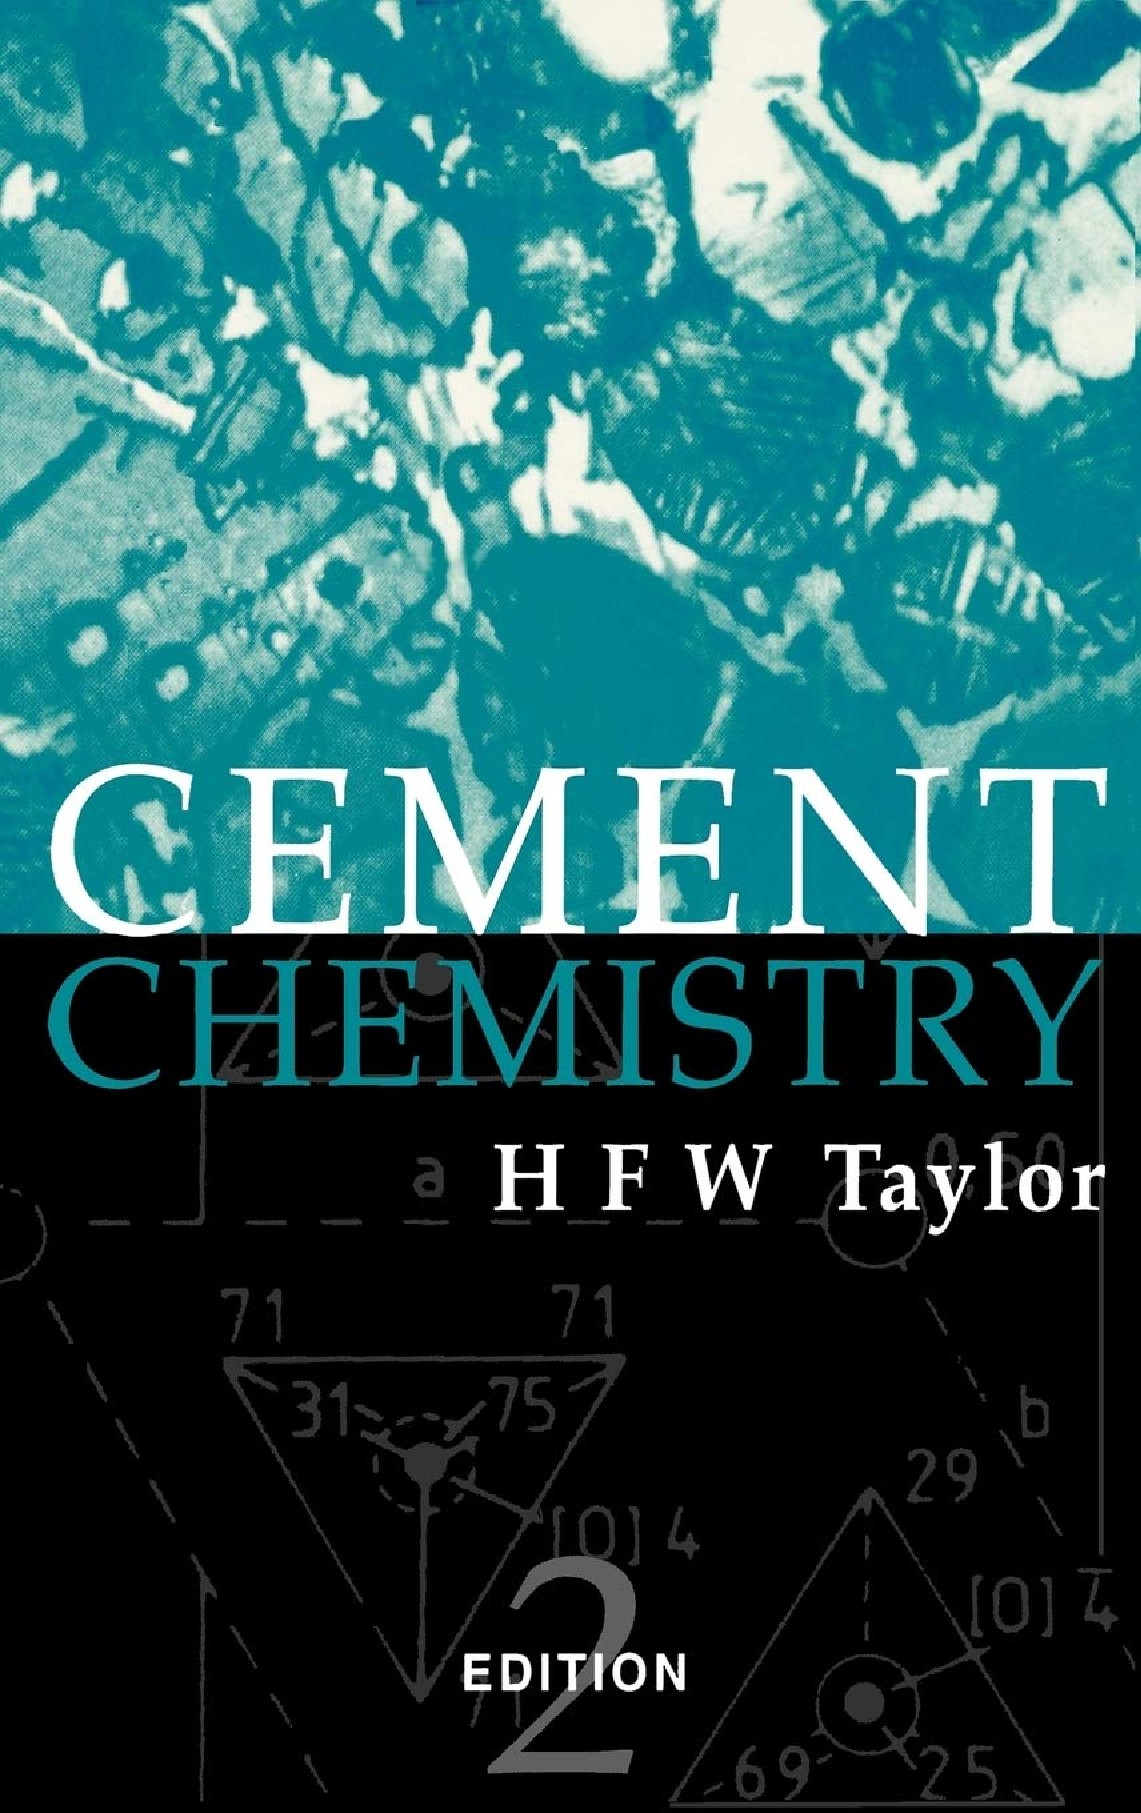 Cement Chemistry, 2nd Edition by H F W Taylor